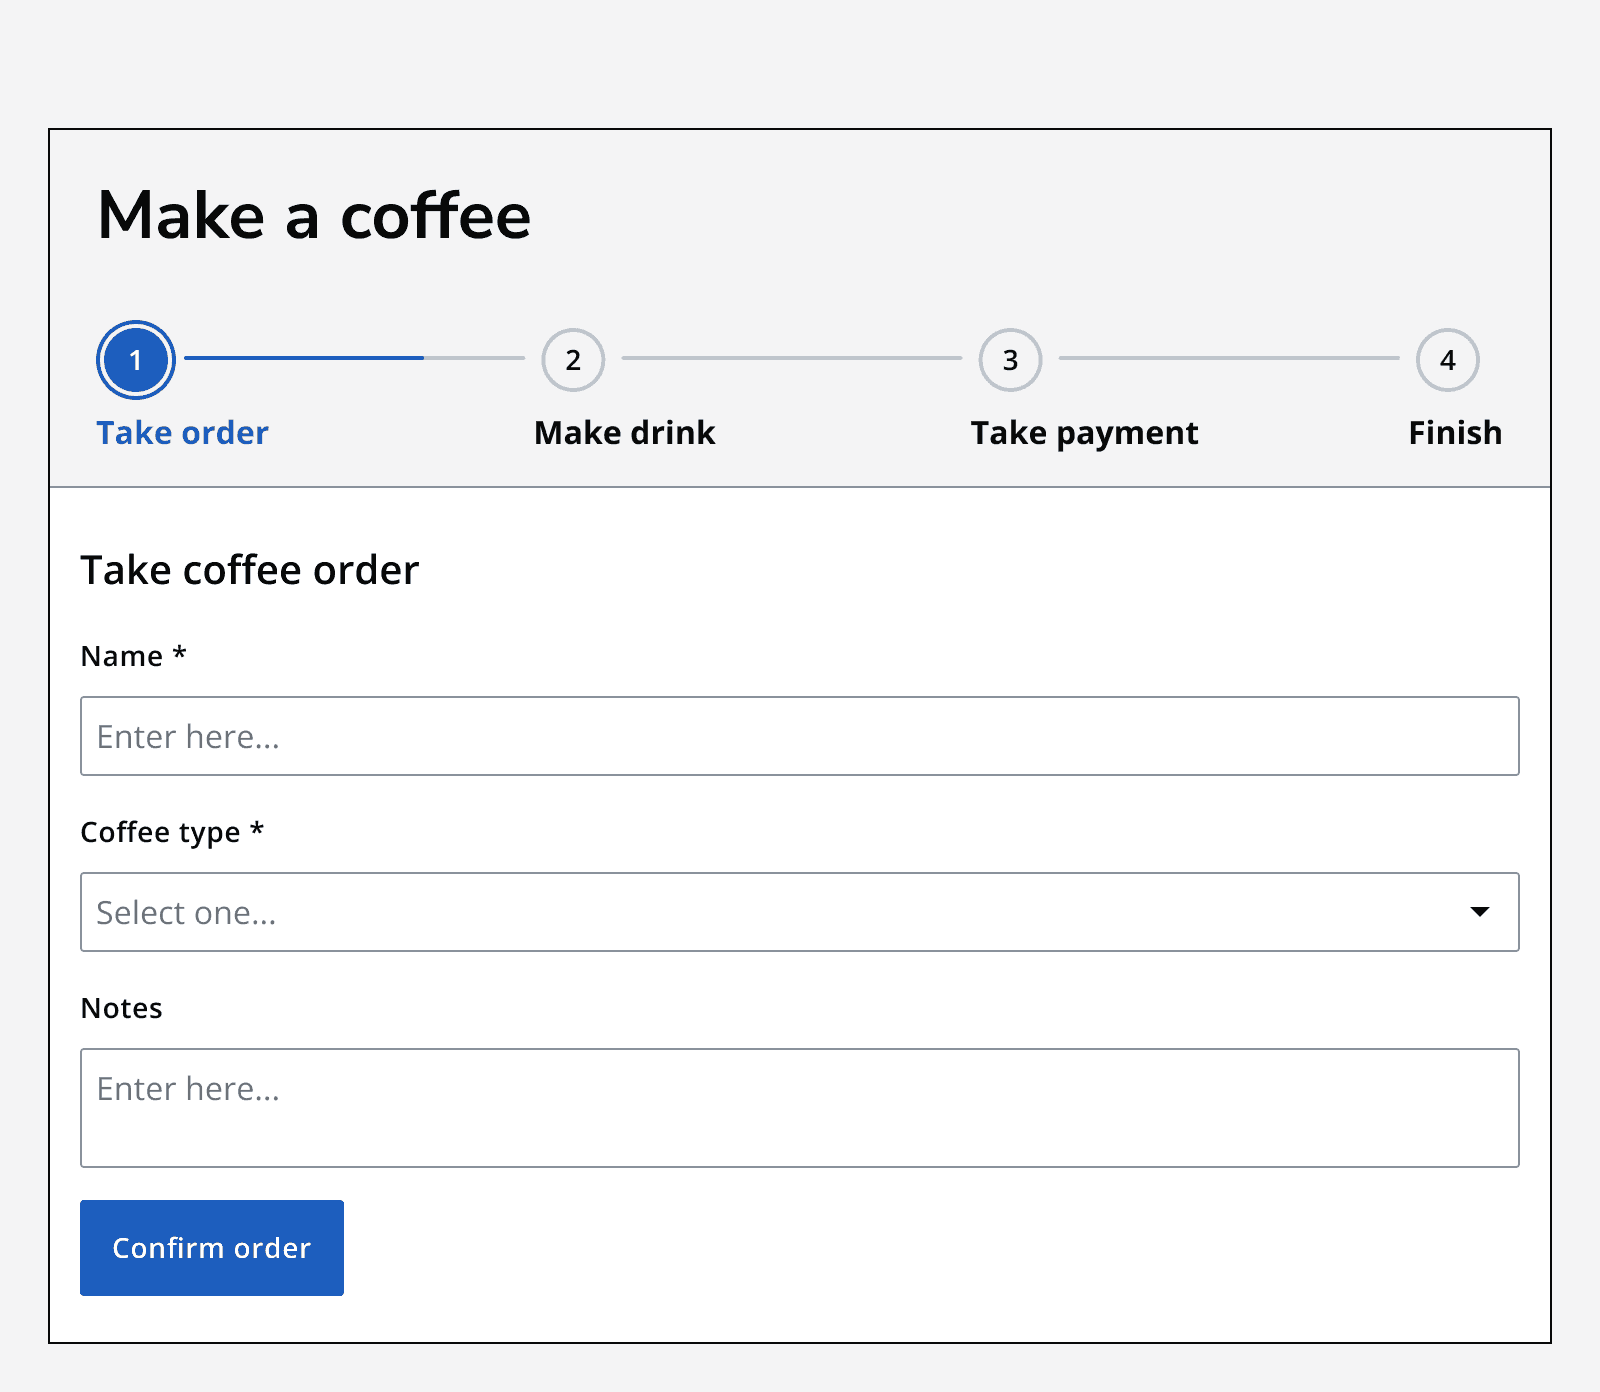 An image showing a form titled 'Make a coffee' featuring a stepper with four steps, labelled 'Take order', 'Make drink', 'Take payment', and 'Finish’. The first step, 'Take order', is selected, and the page below shows three input fields and a button labelled 'Confirm order'.